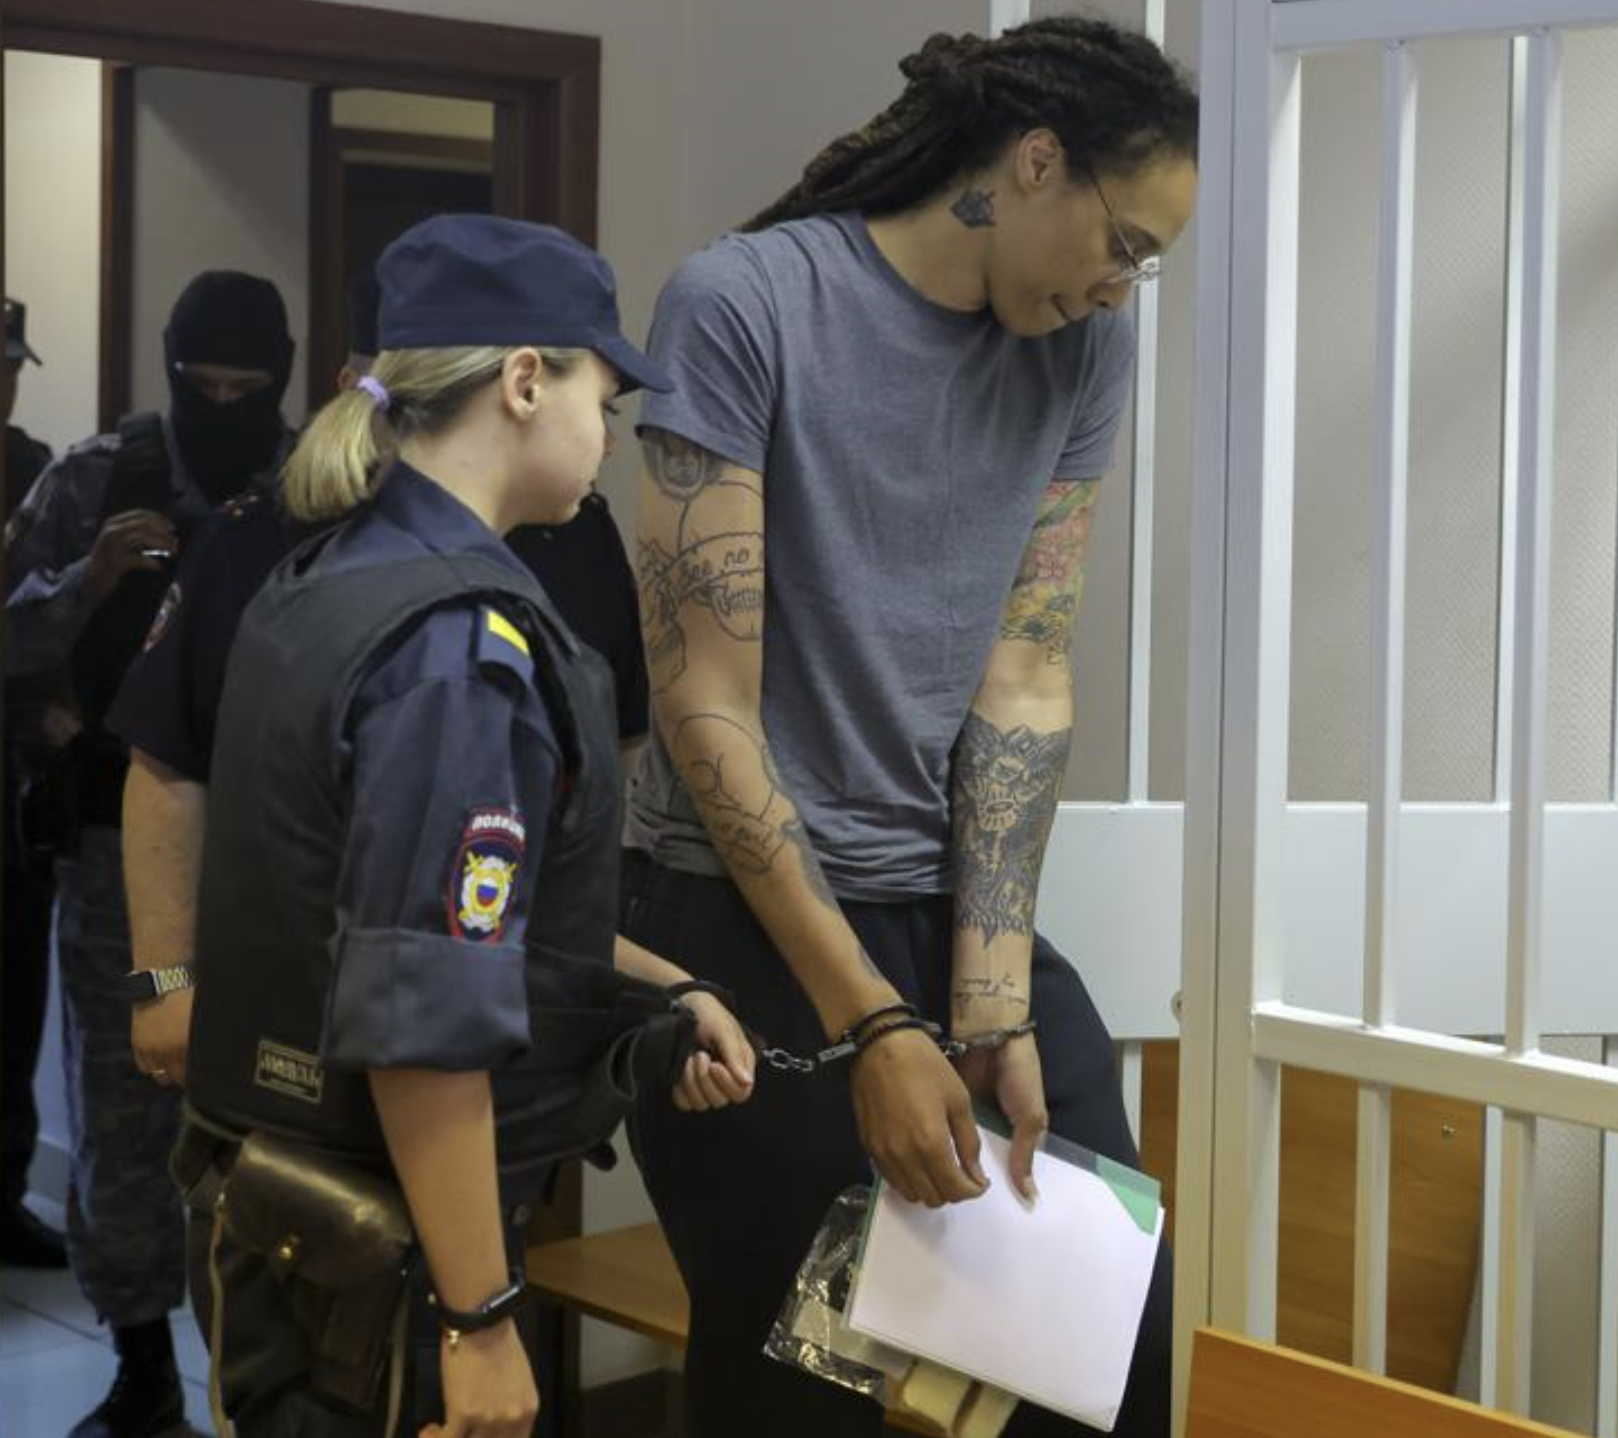 WNBA star Brittney Griner enters a cage in a courtroom prior to a hearing in Khimki just outside Moscow, Russia